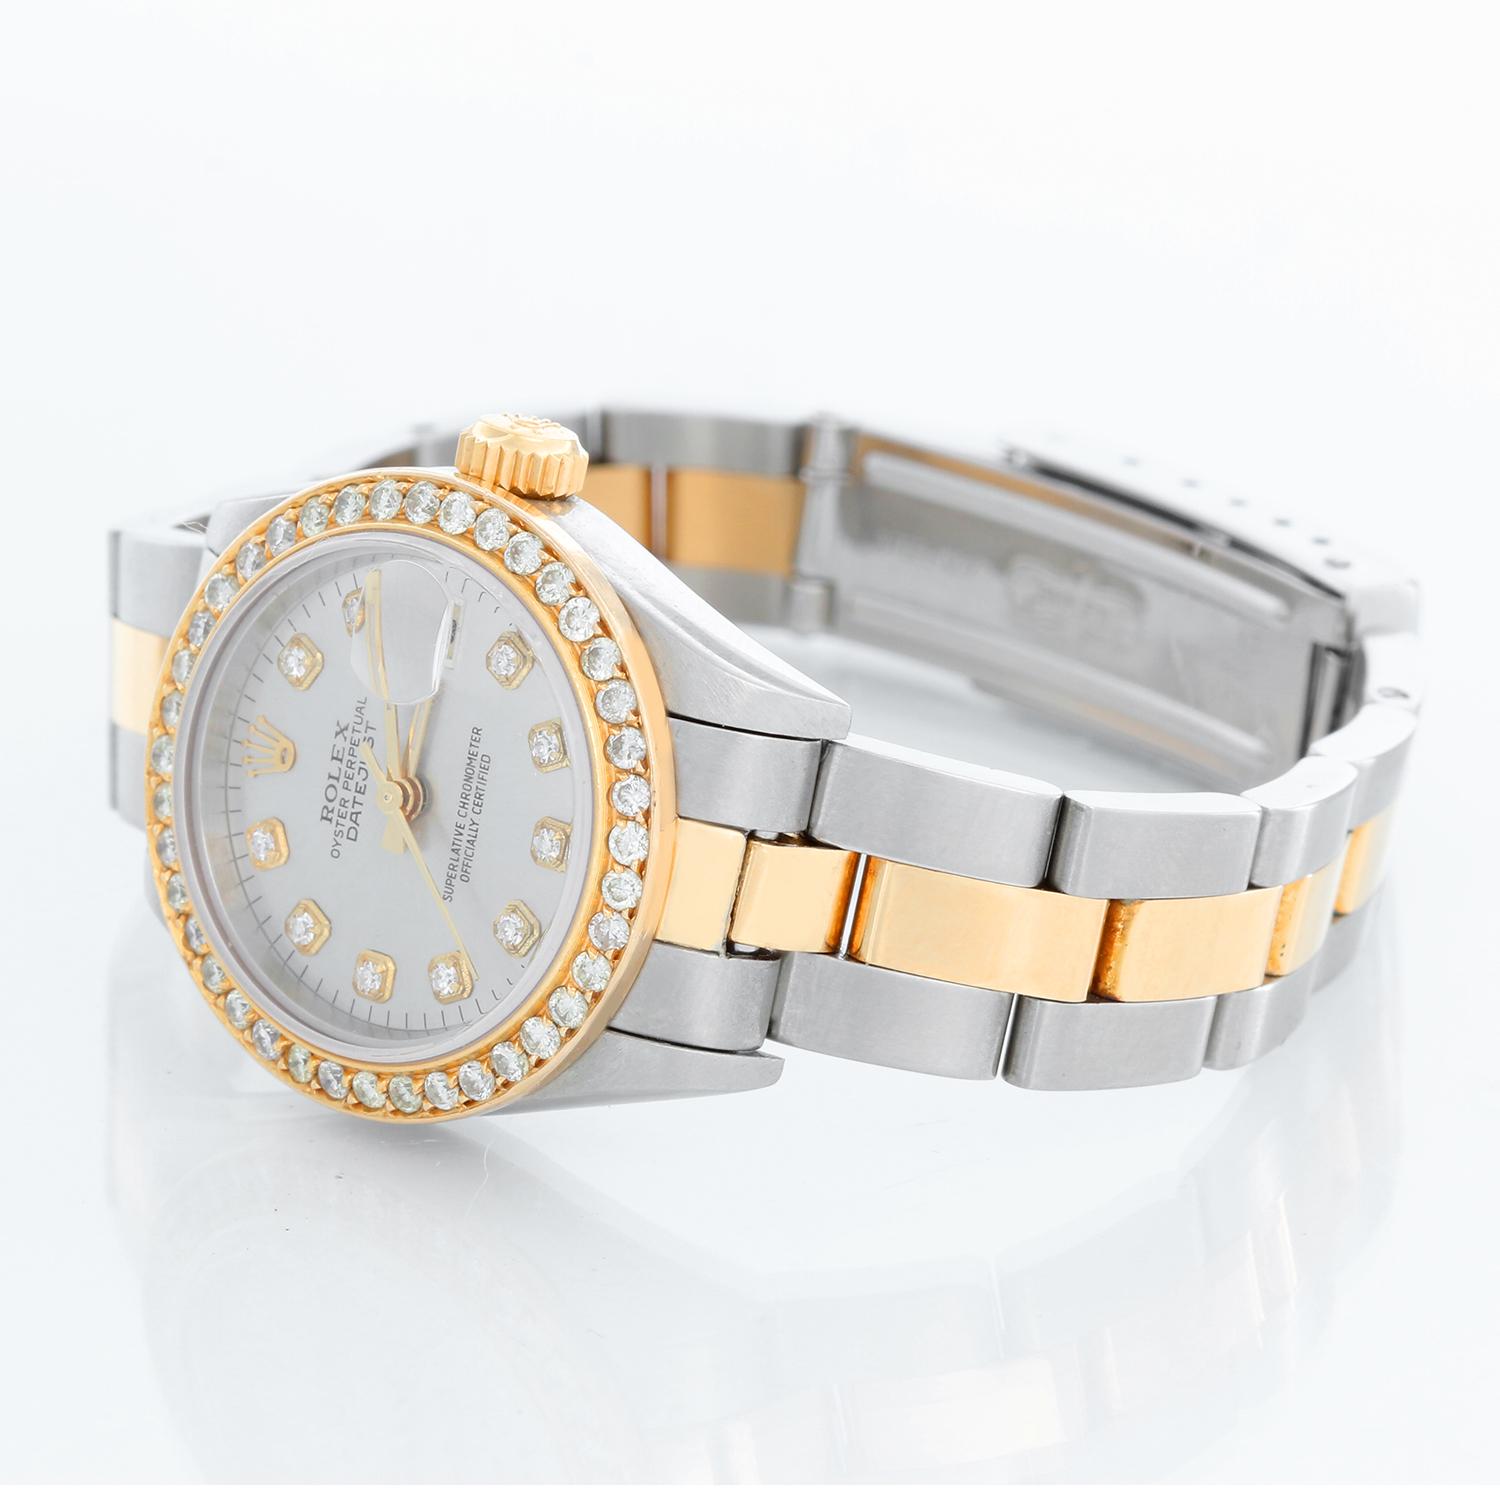 Rolex  2-Tone Datejust Steel & Gold Ladies Watch 69173 - Automatic winding, 29 jewels, Quickset date, sapphire crystal. Stainless steel case with custom diamond bezel ( 26 mm) . Custom silver diamond dial. Stainless steel and 18k yellow gold oyster